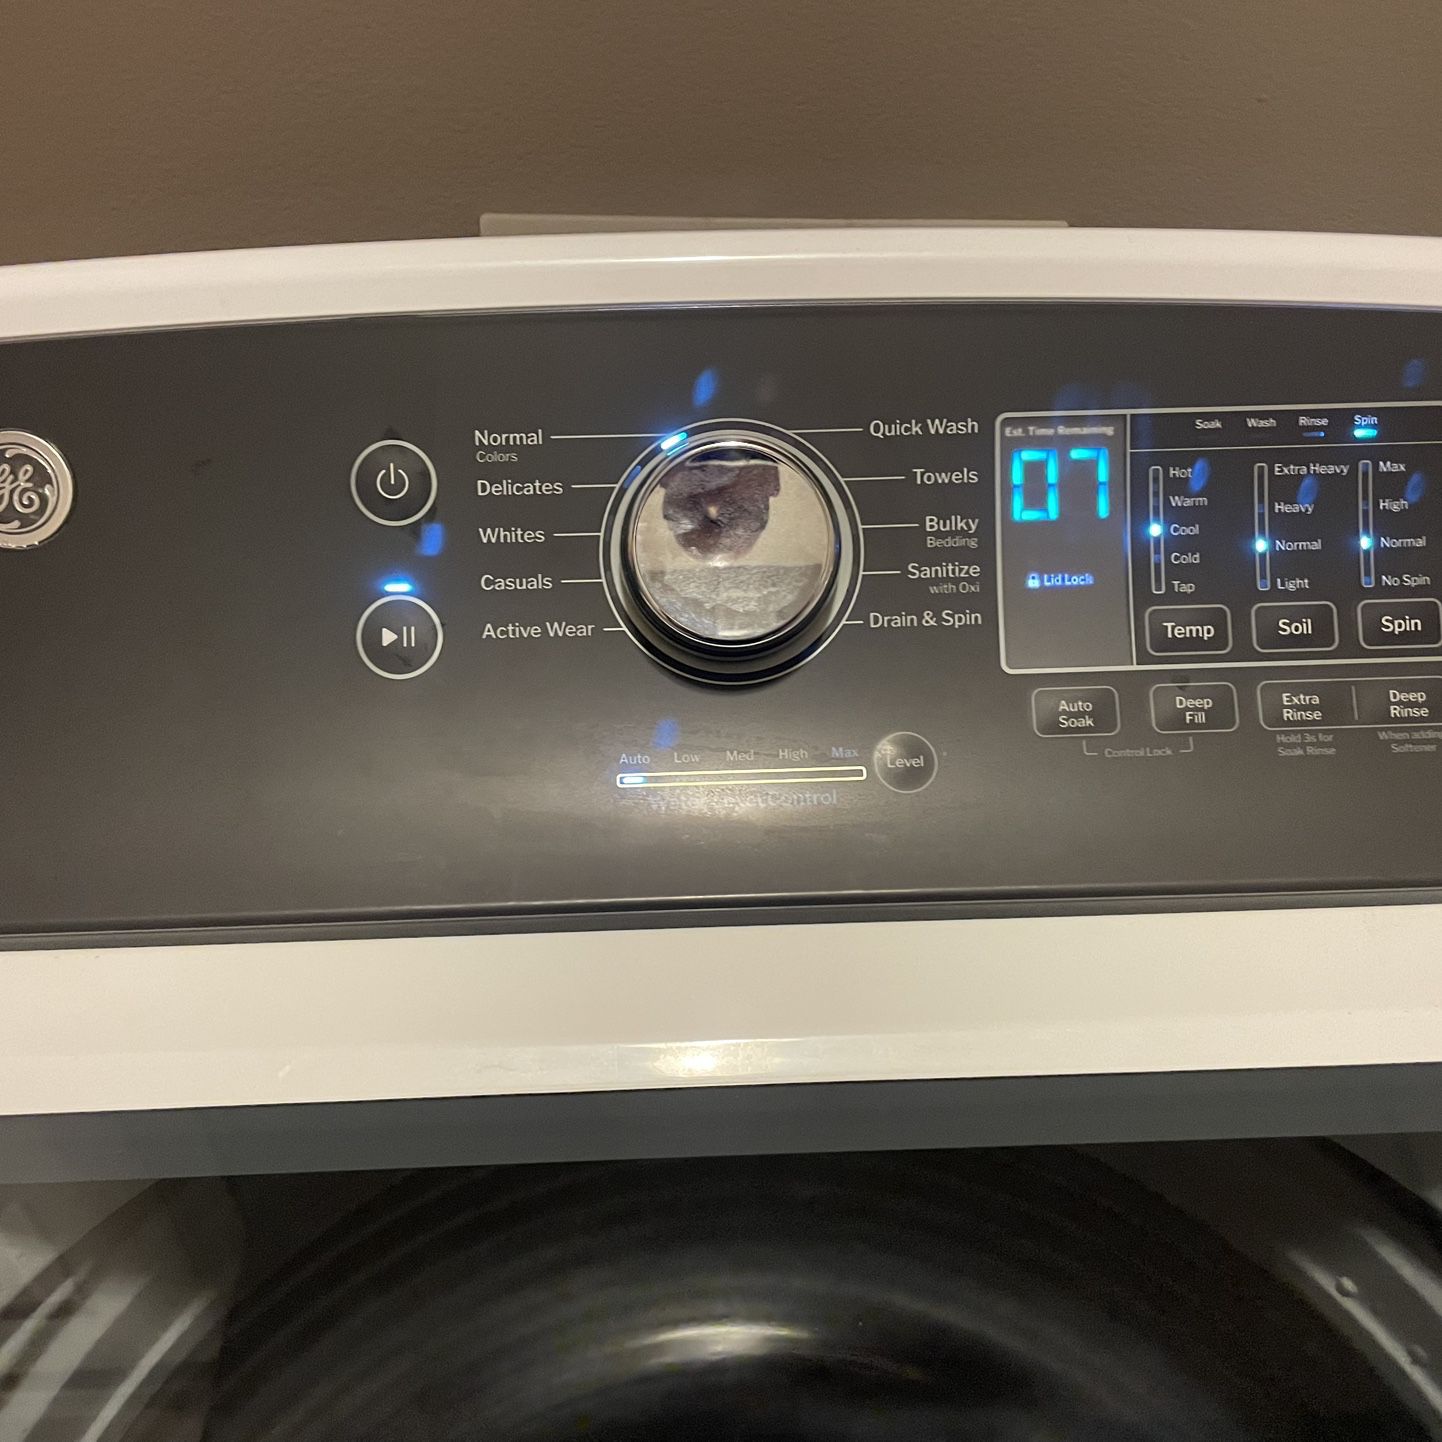 New GE washer and Dryer